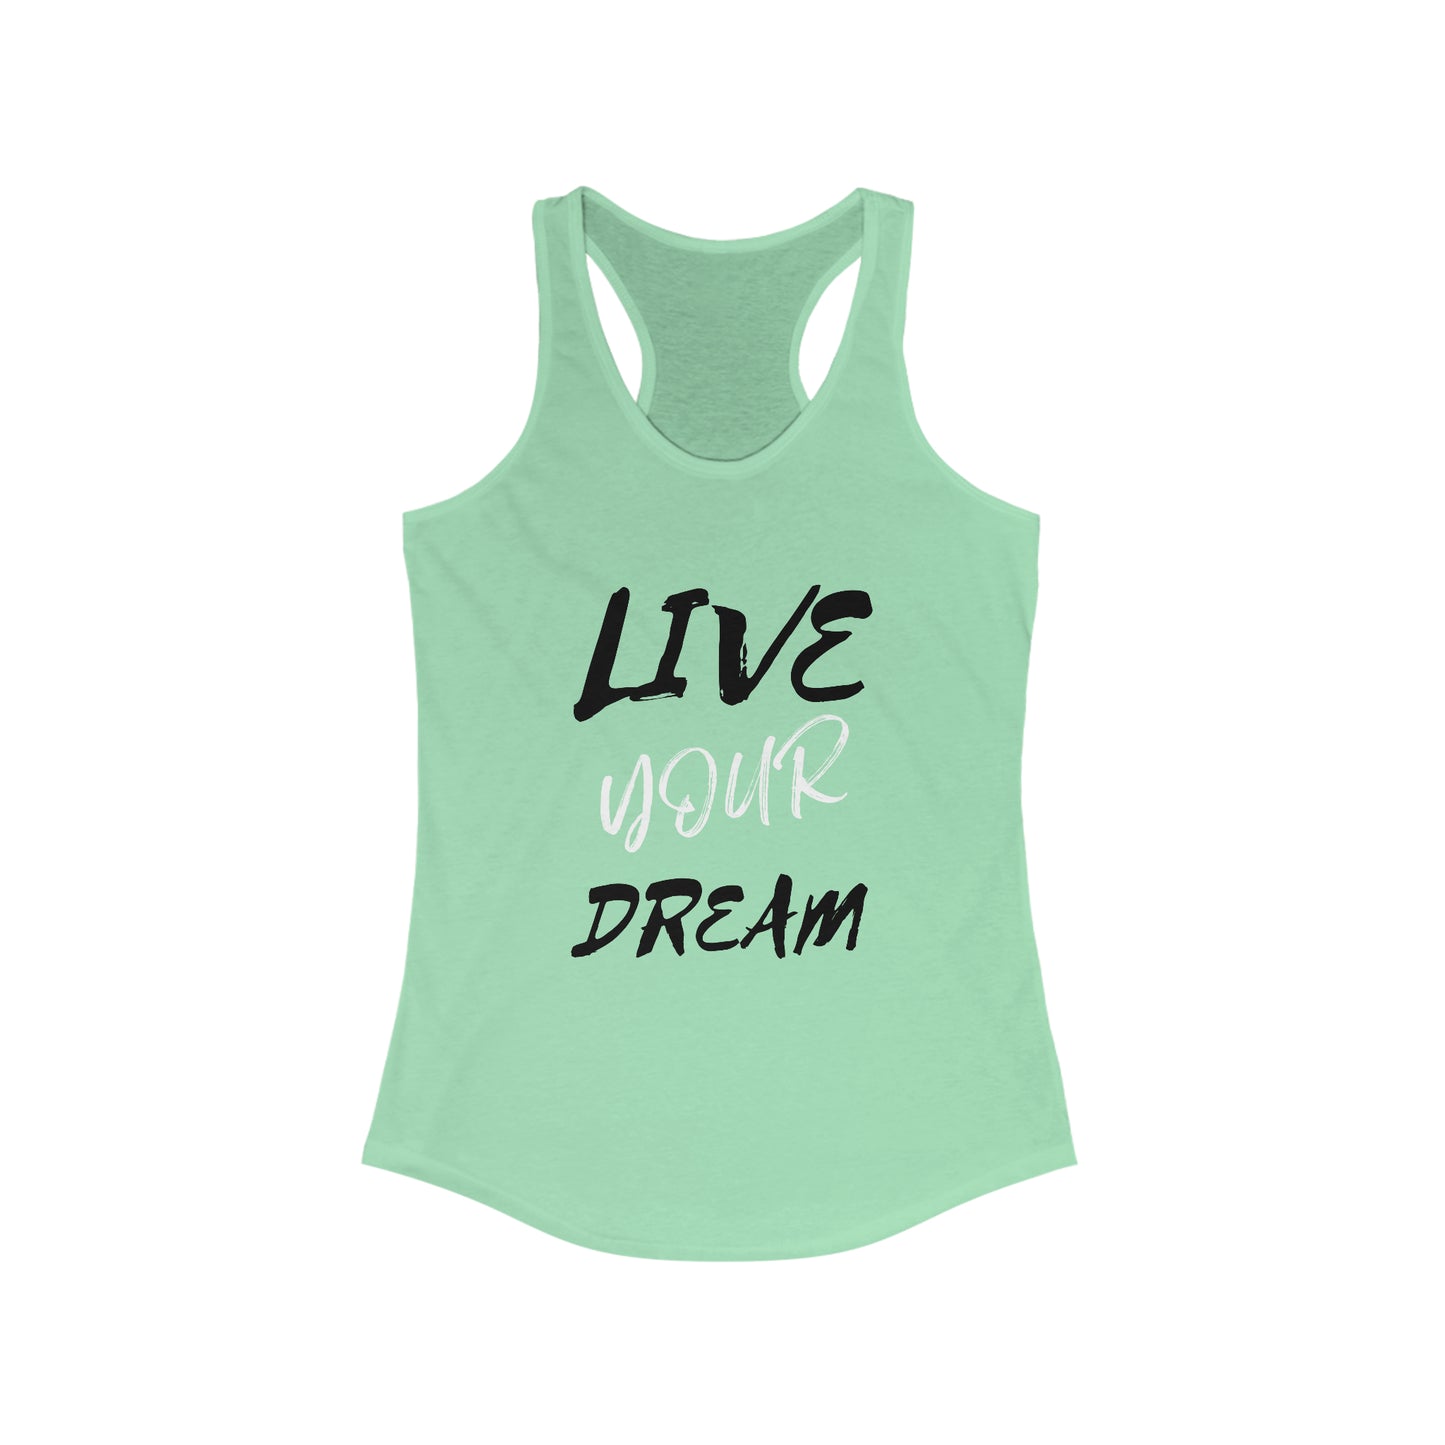 Live your Dream Inspirational Tank Top